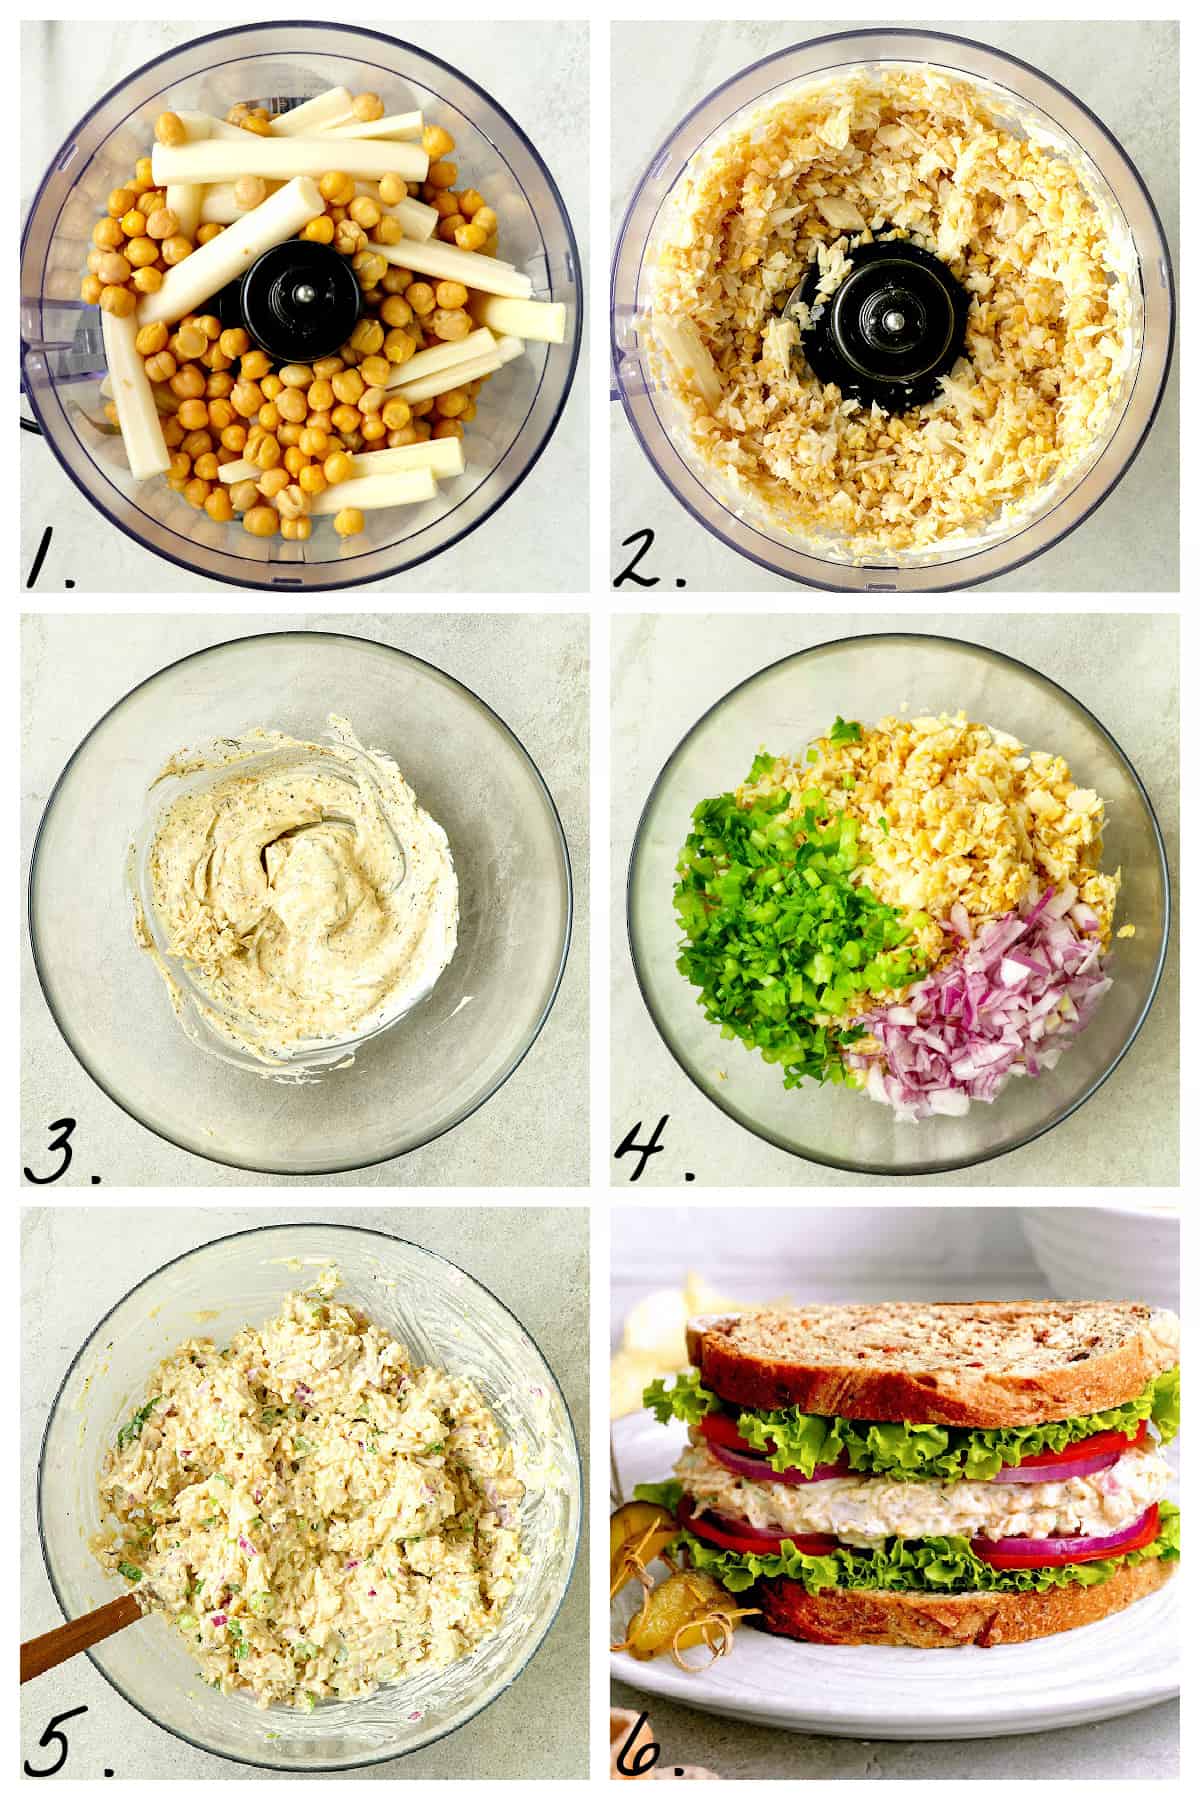 Six process photos showing how to make the sandwich filling. 